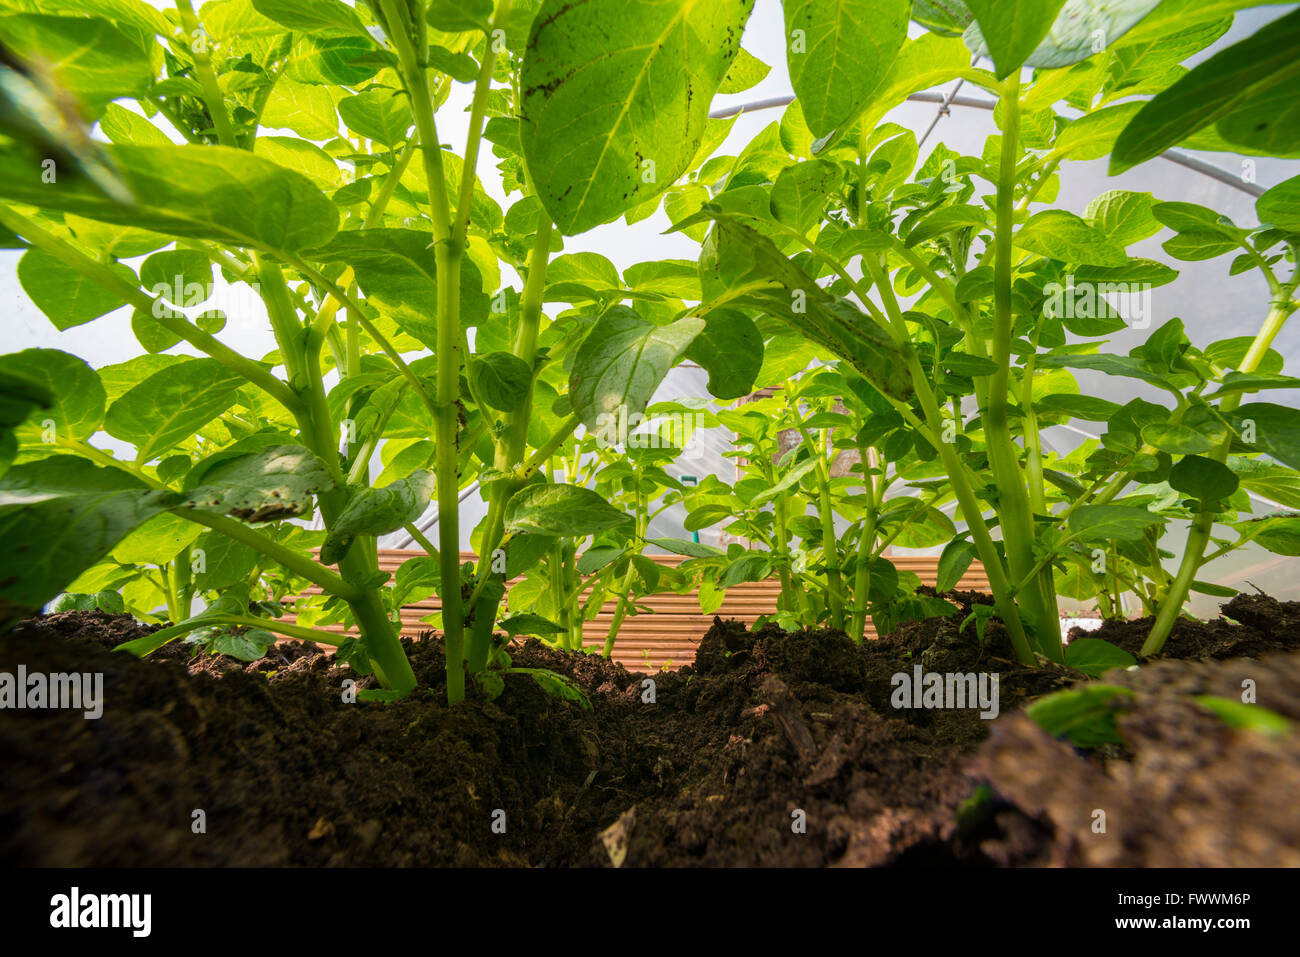 New potatoes growing in a polytunnel, Shropshire, England. Stock Photo